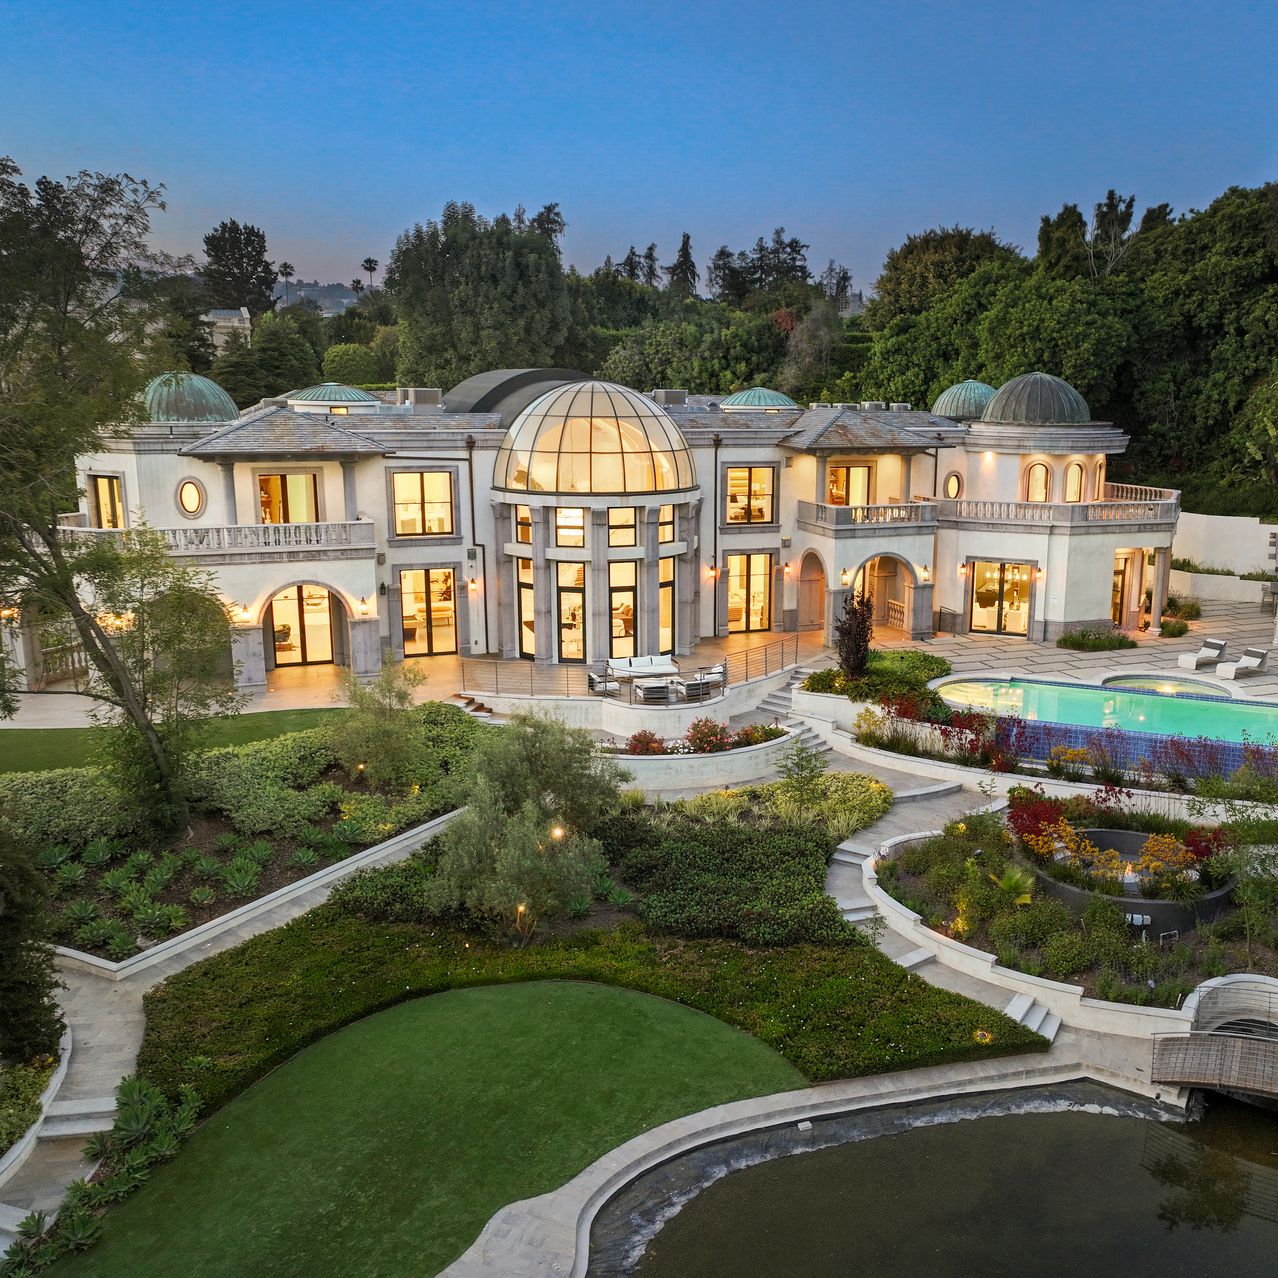 An L.A. Home Near the Playboy Mansion Sells for $34 Million - WSJ